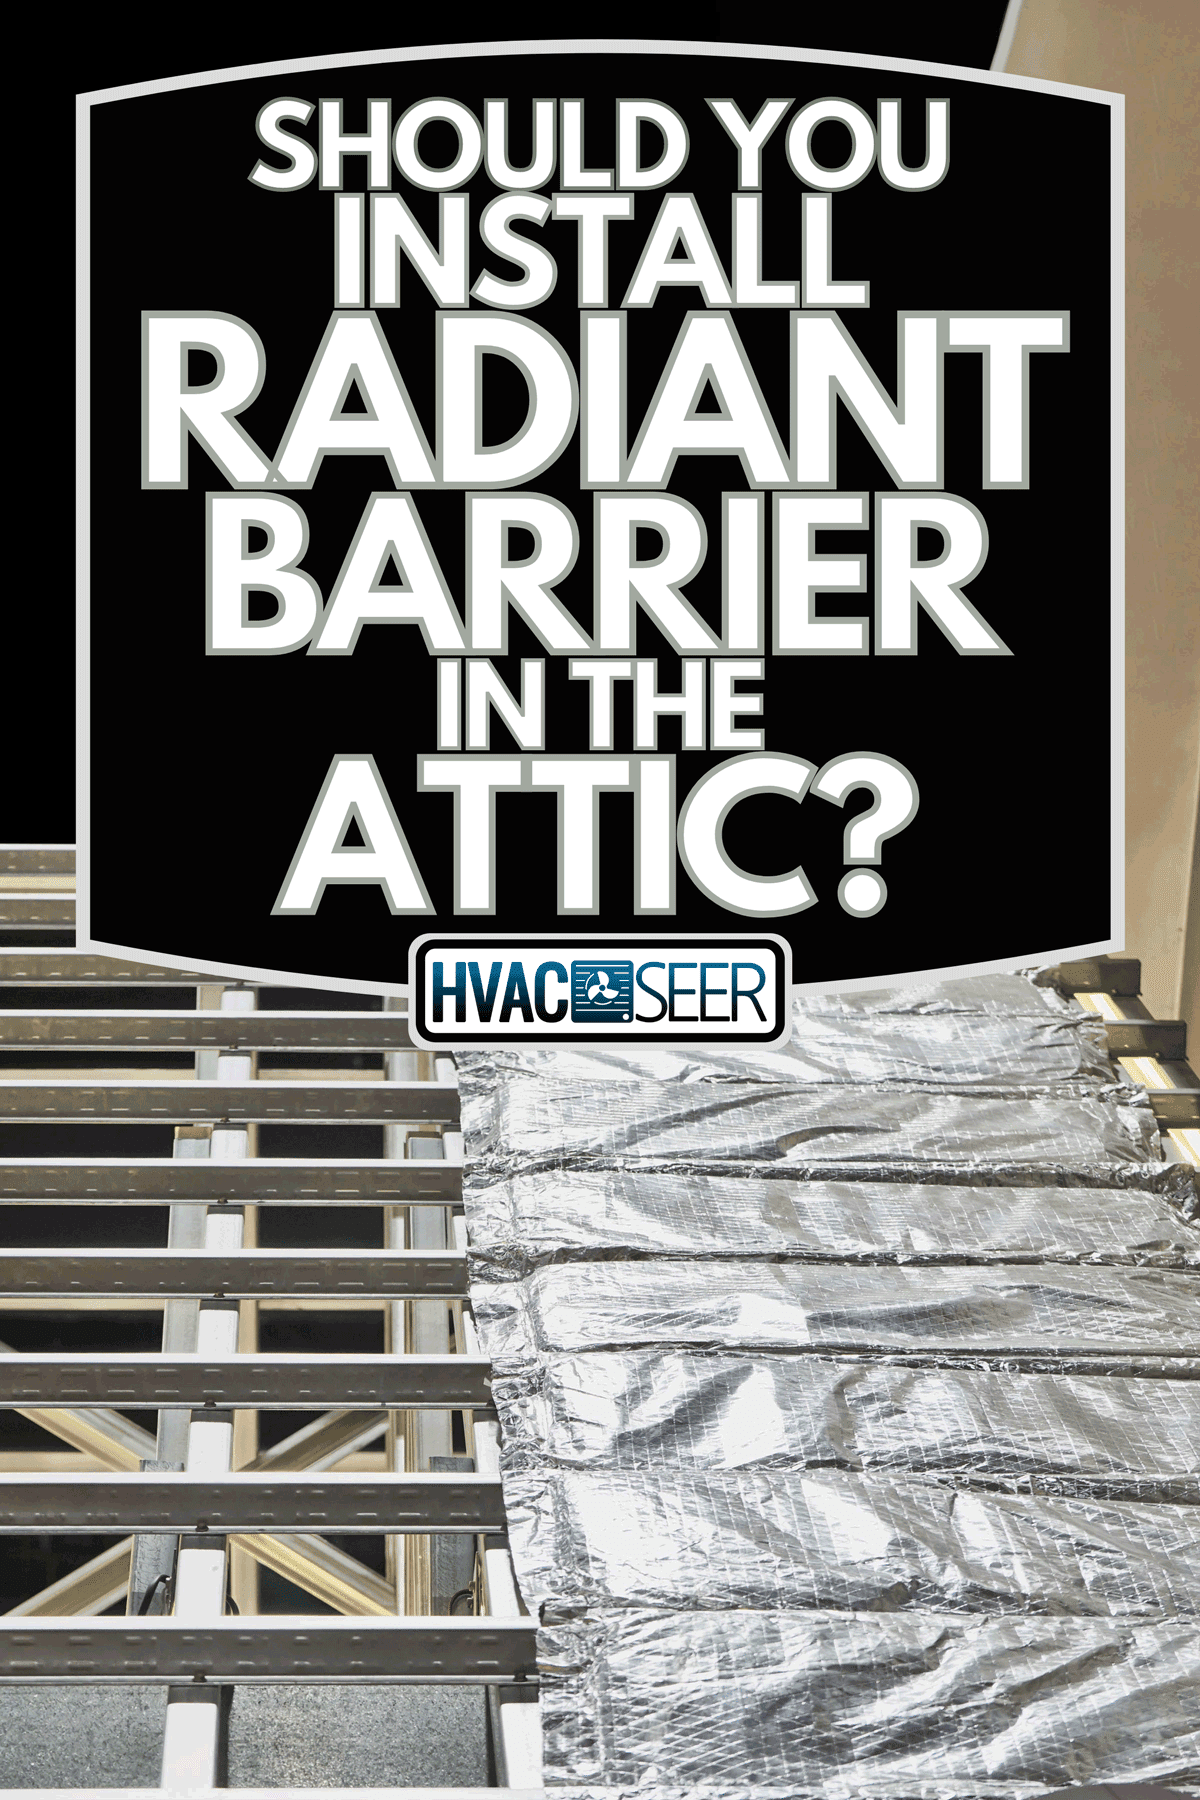 Attic insulation is being installed in new homes, Should You Install Radiant Barrier In The Attic? Pros & Cons